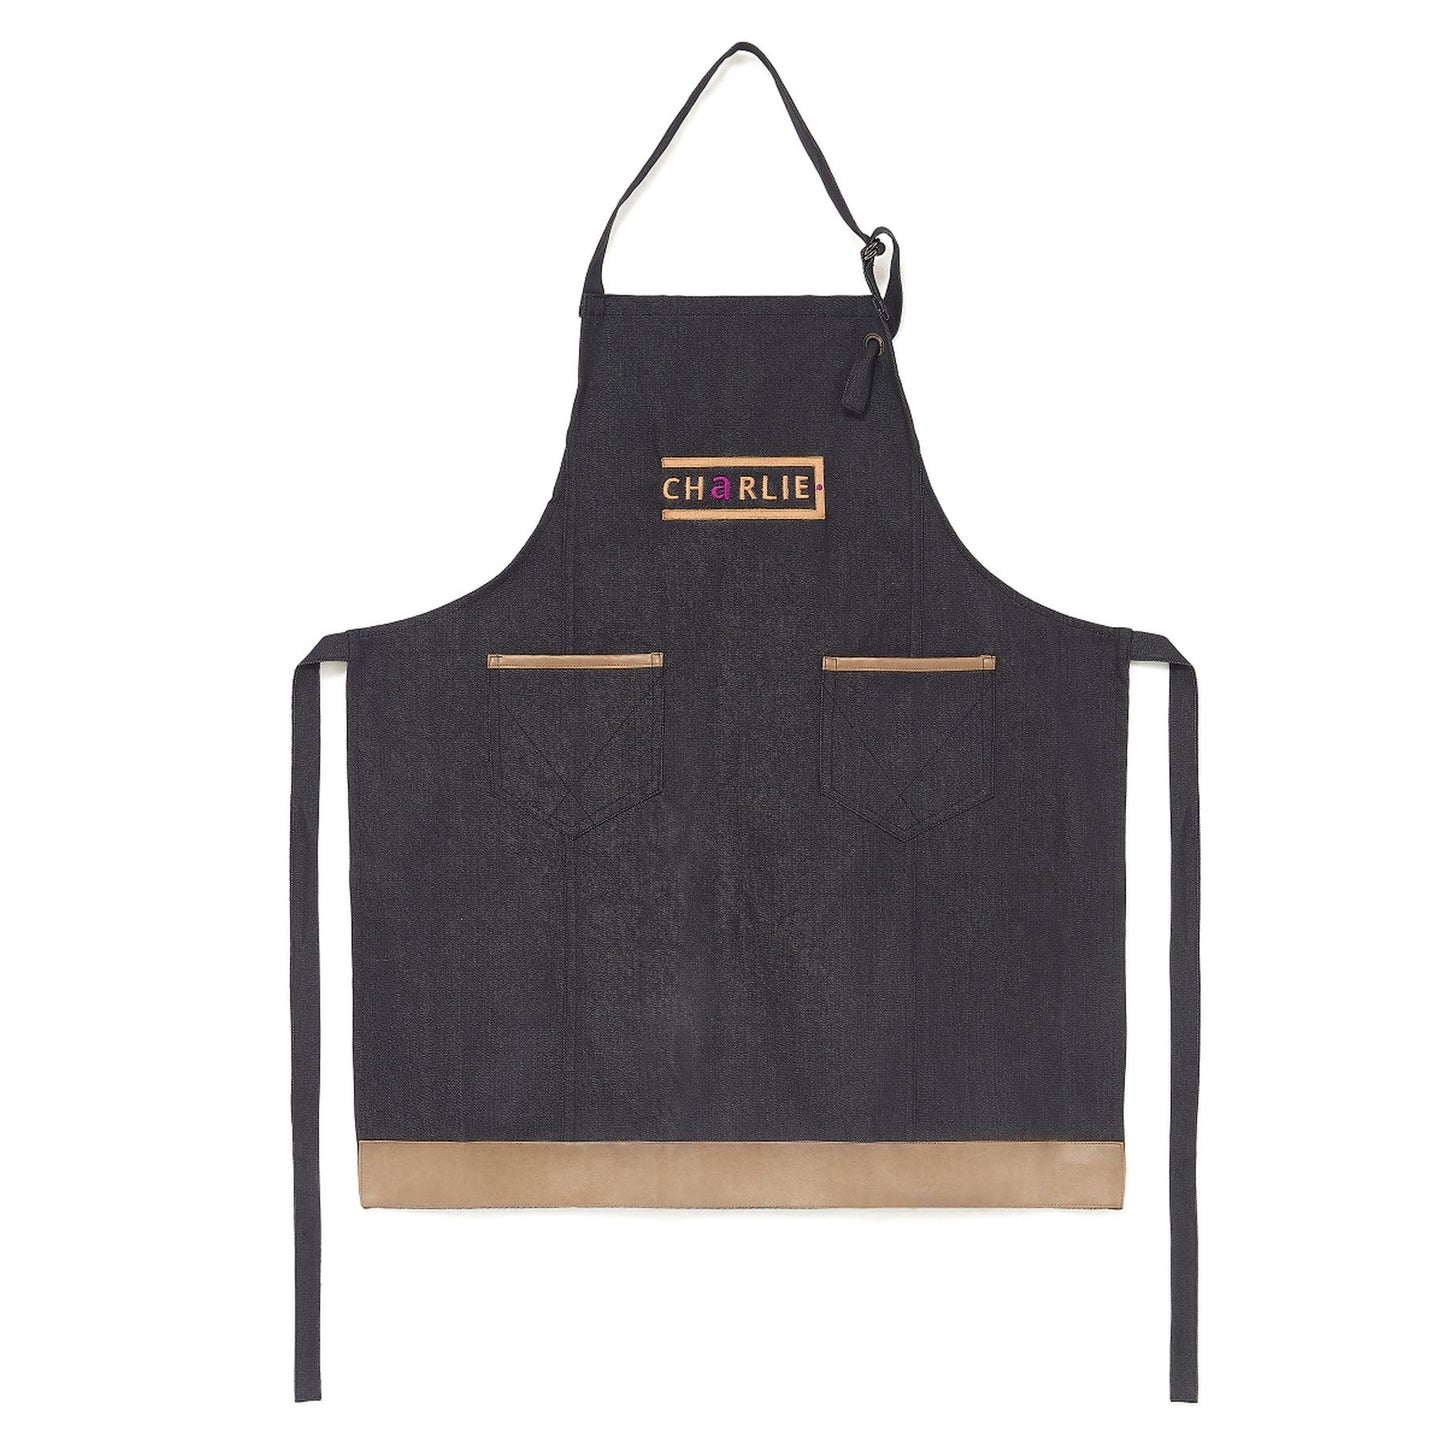 Charlie Oven - Apron